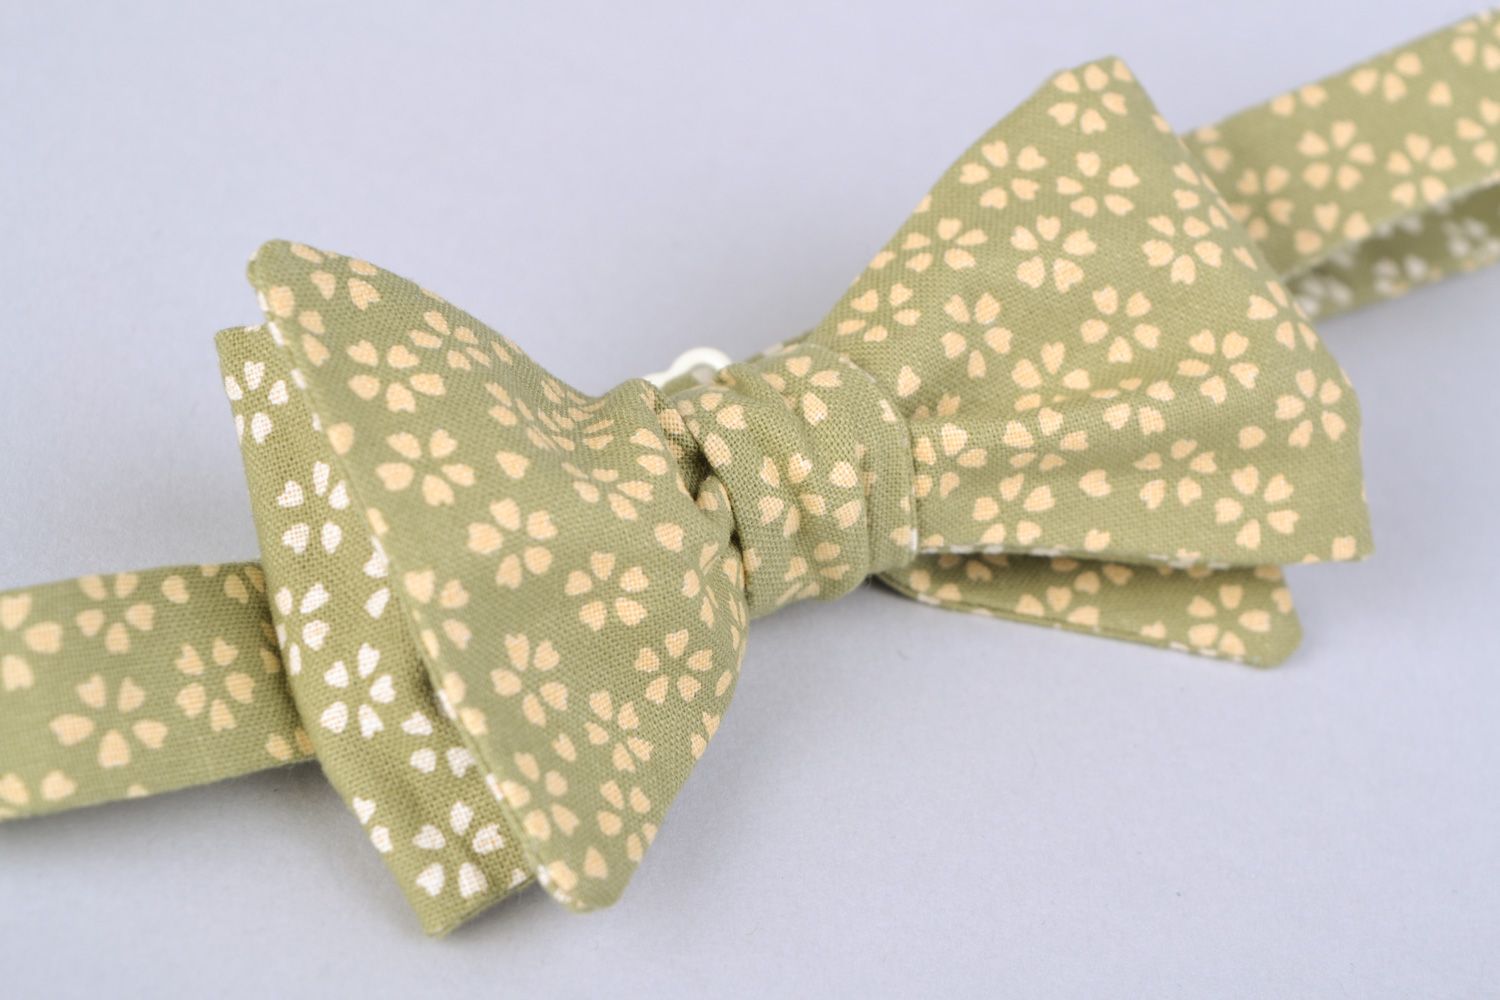 Handmade bow tie sewn of cotton fabric with floral pattern in calm color palette photo 5